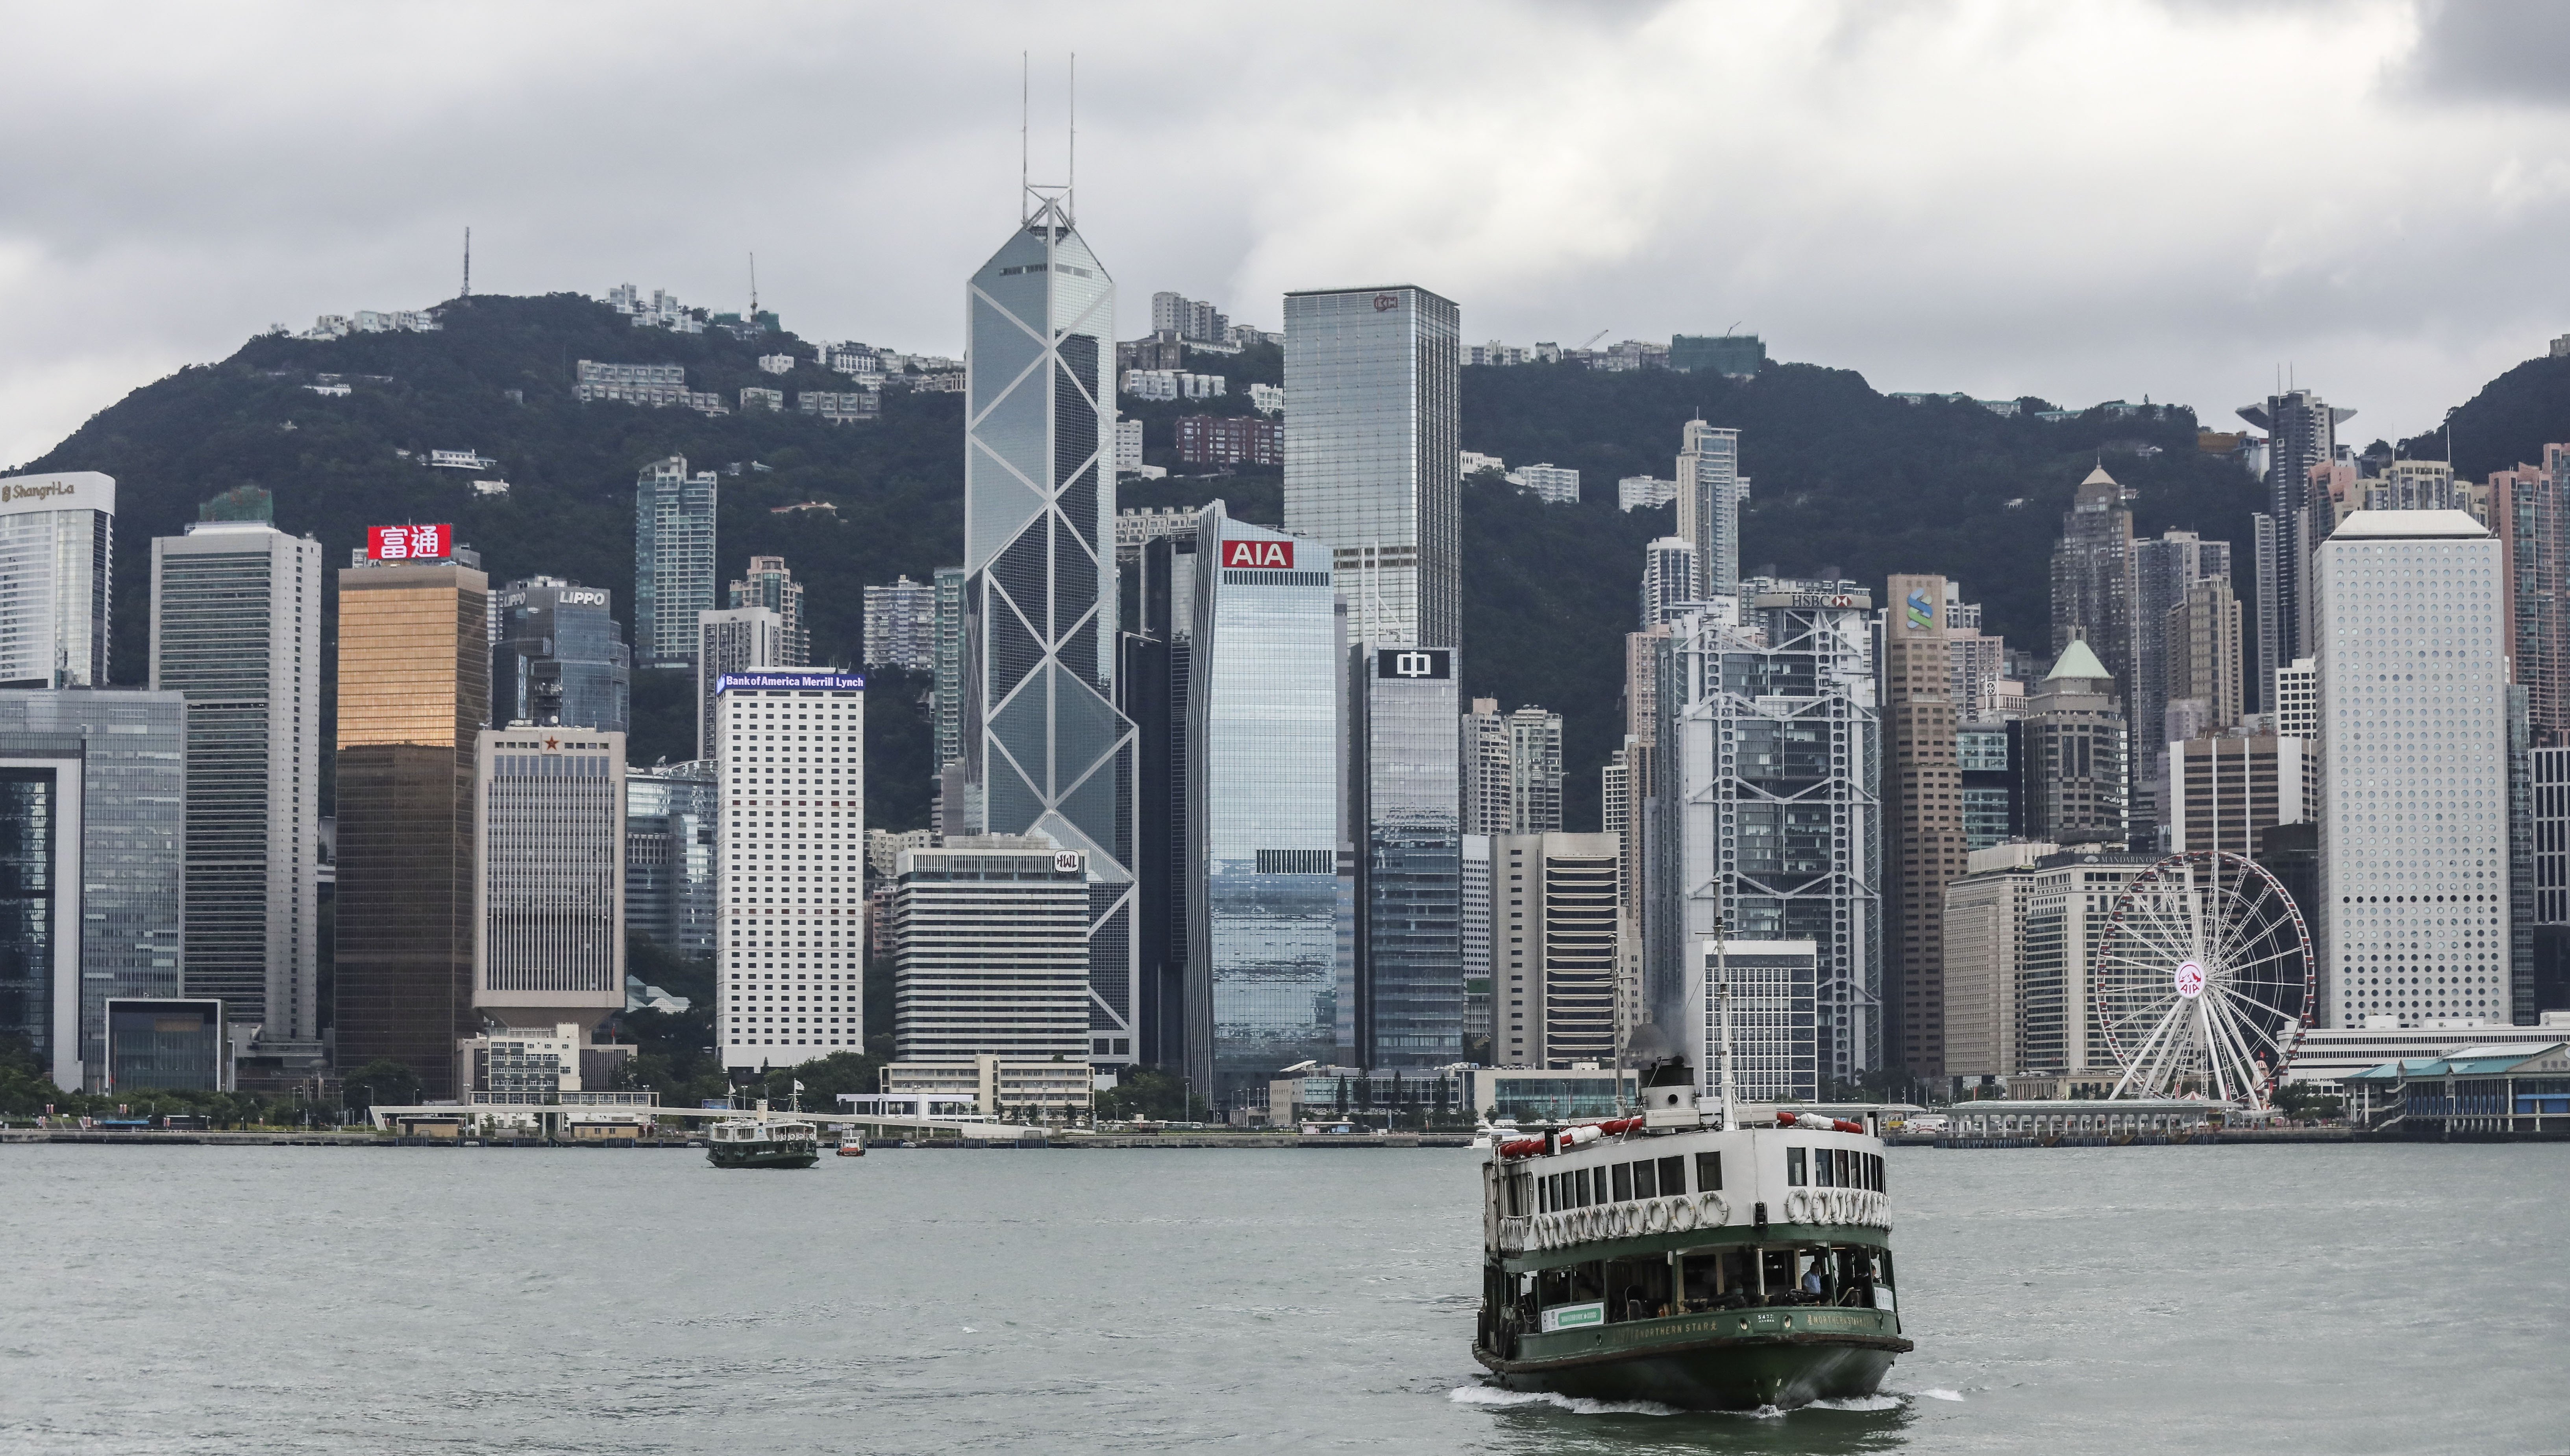 Hong Kong is fighting the coronavirus epidemic while also having to deal with travel restrictions imposed by other countries. Photo: Dickson Lee